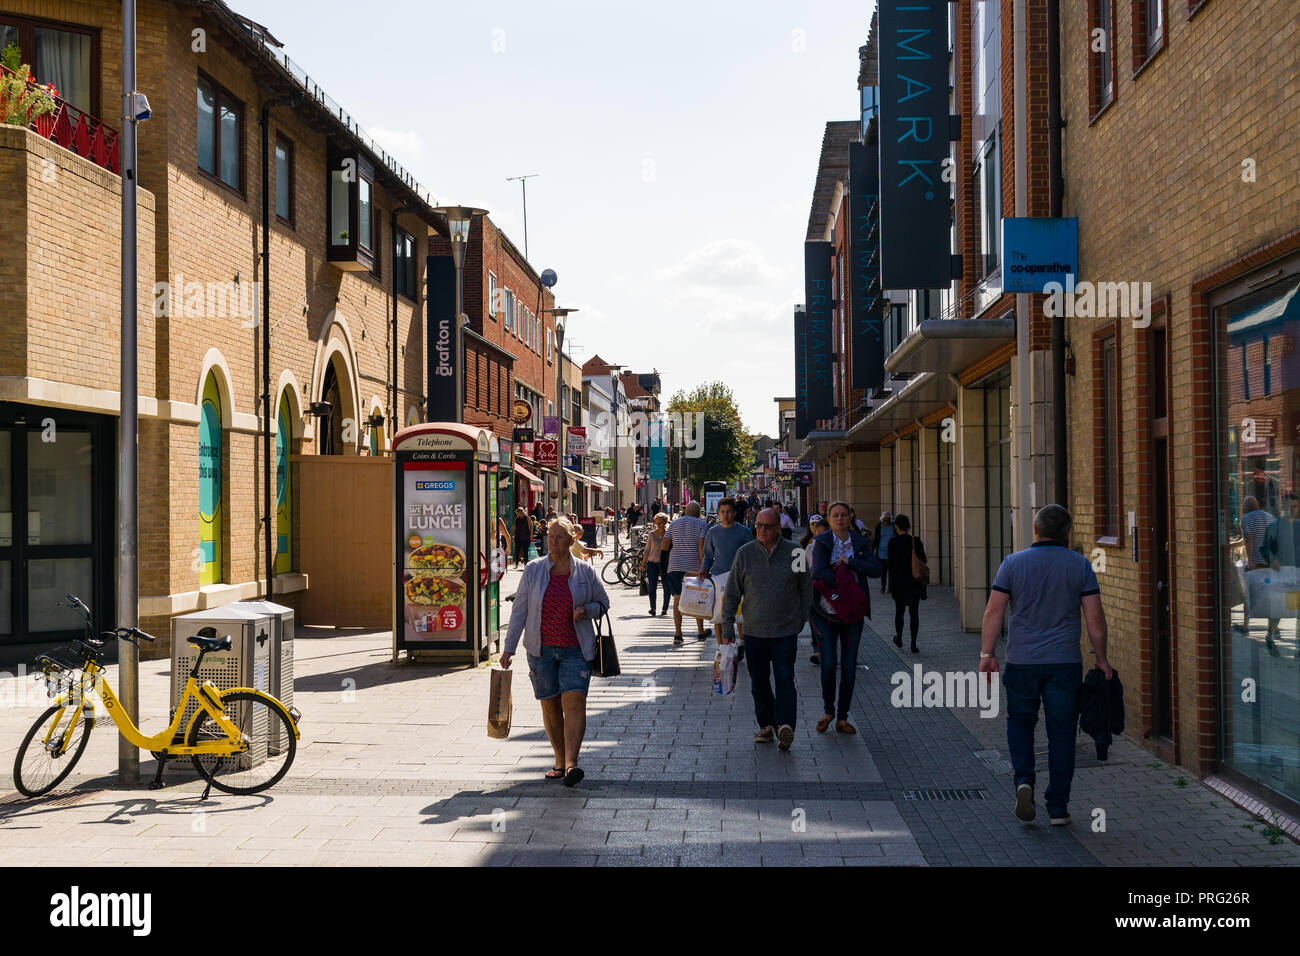 View along Burleigh Street with shoppers walking along the pavement, Primark and the Grafton Centre line the street, Cambridge, UK Stock Photo